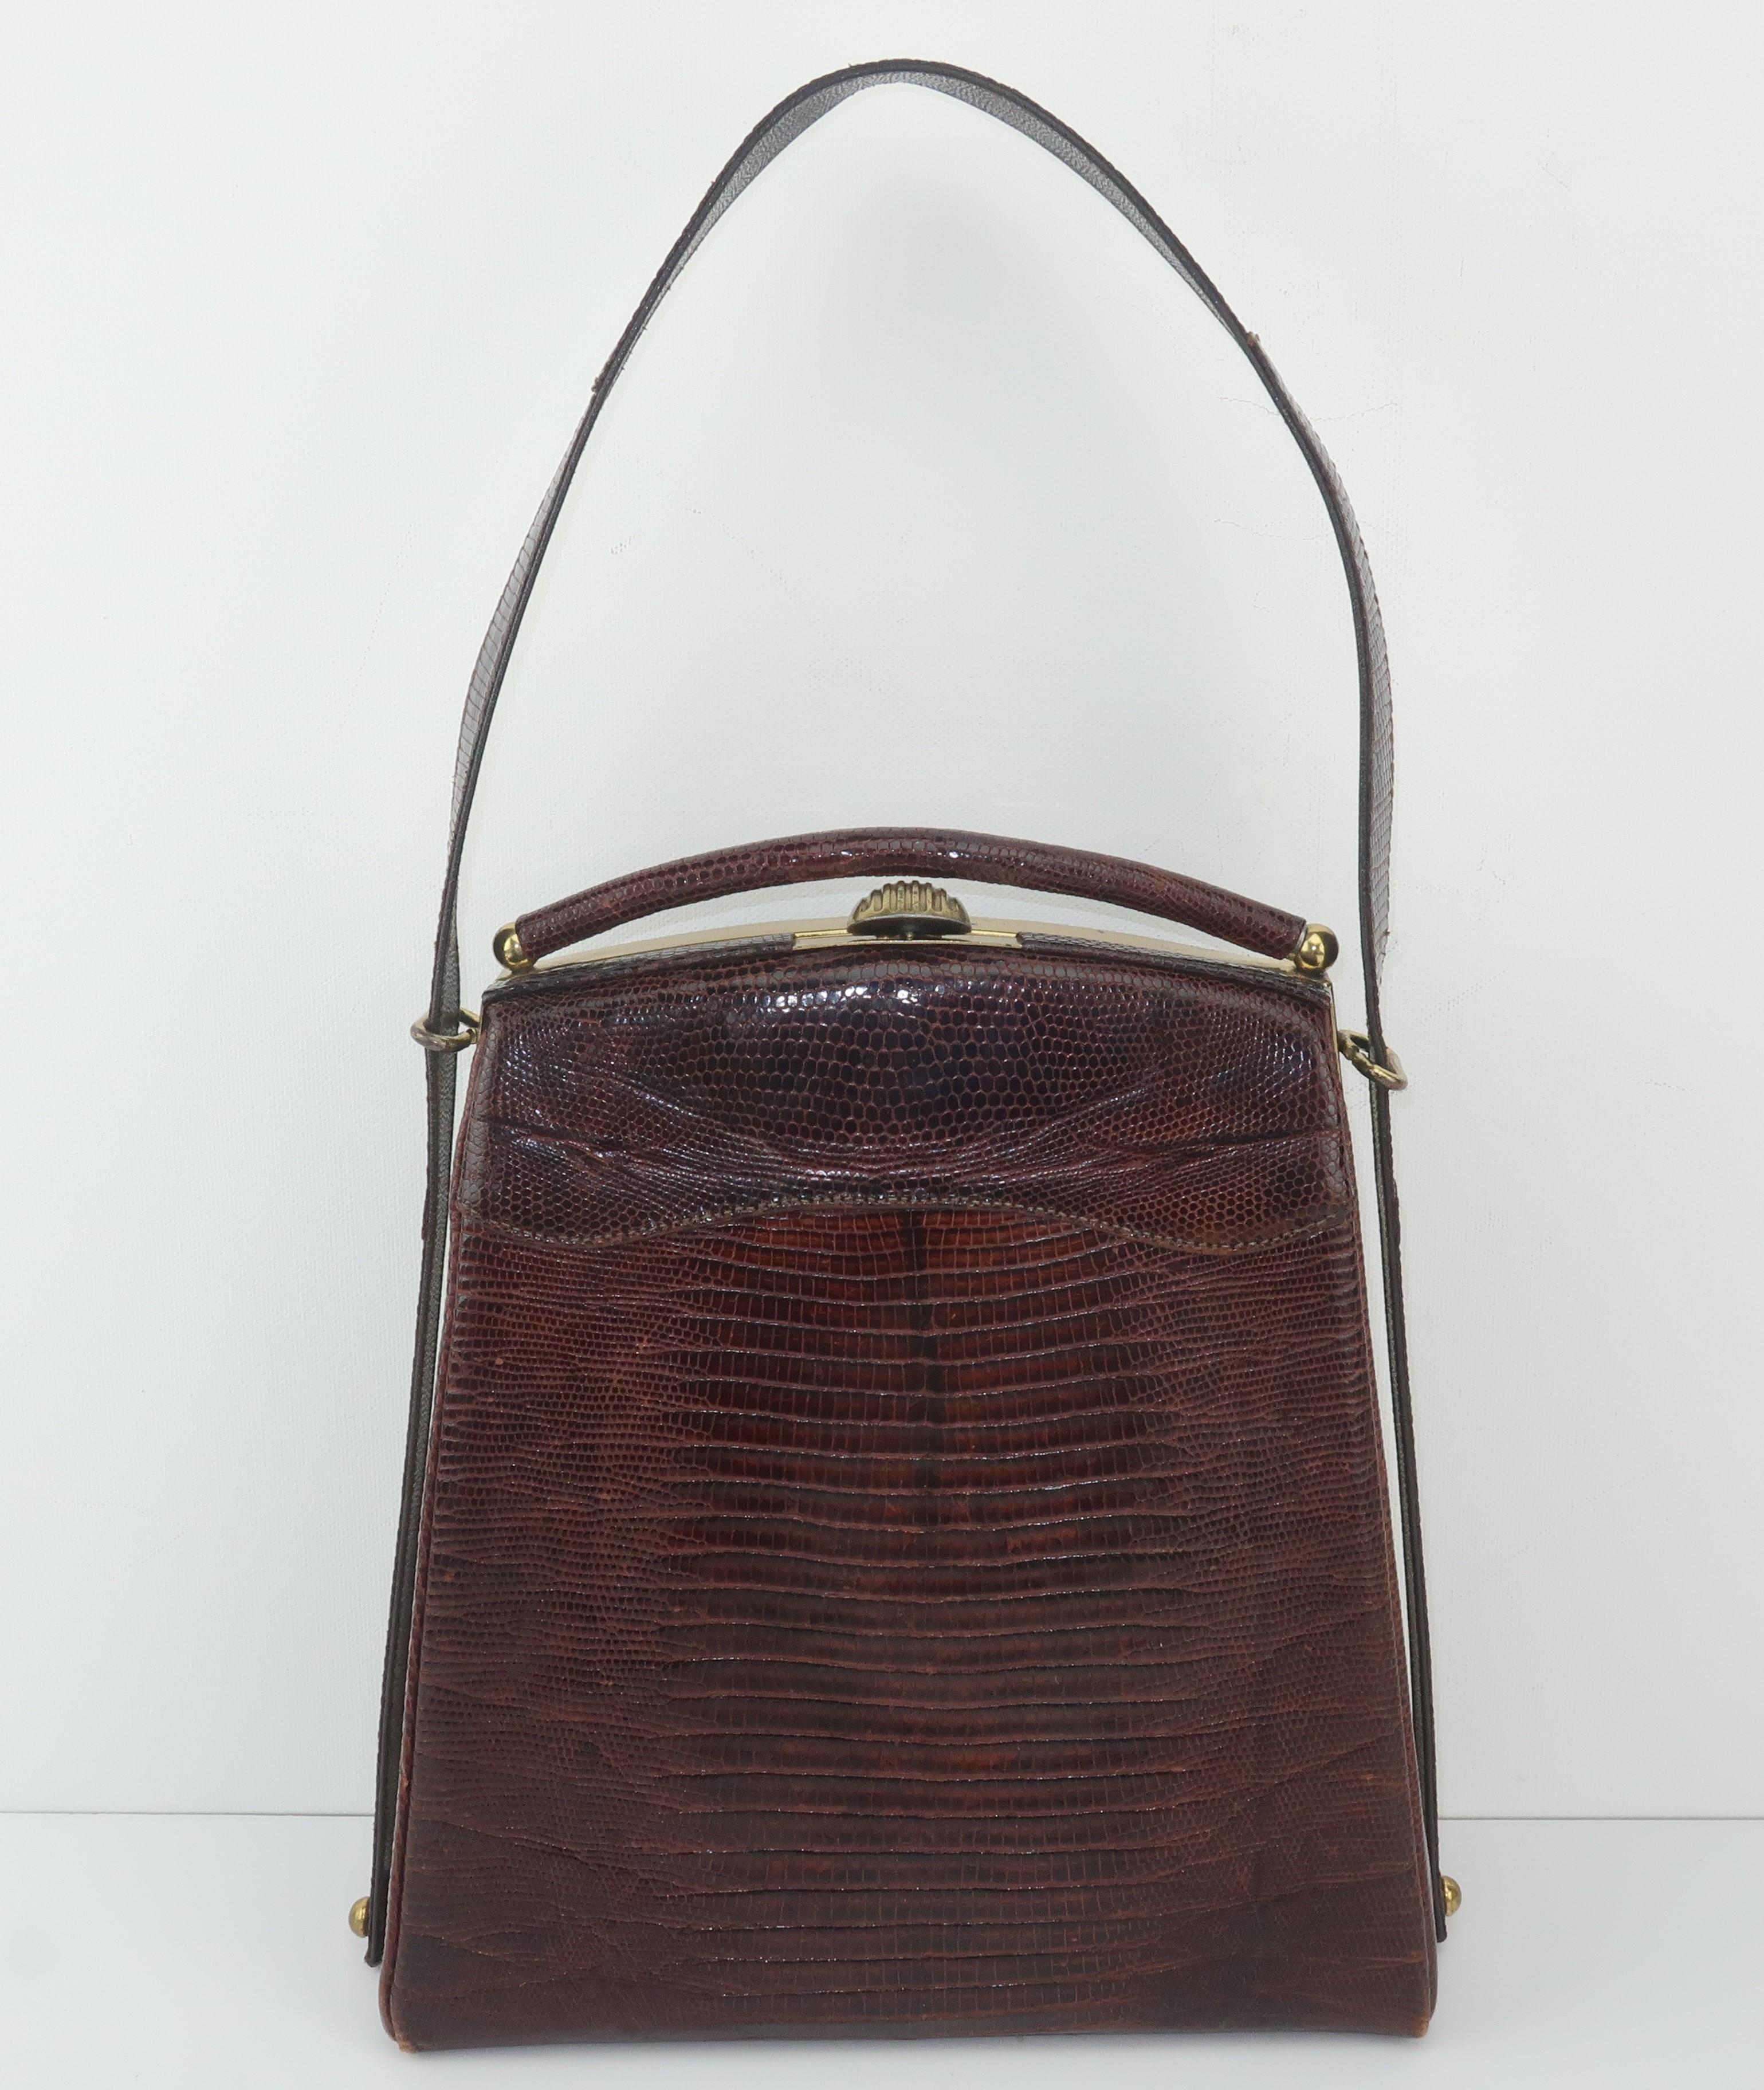 A 1950's brown lizard skin handbag with a unique tall silhouette accented by a skin covered arched bar at the top of the frame.  The handle feeds through glides at the top of the frame and is tacked at the base adding another interesting design